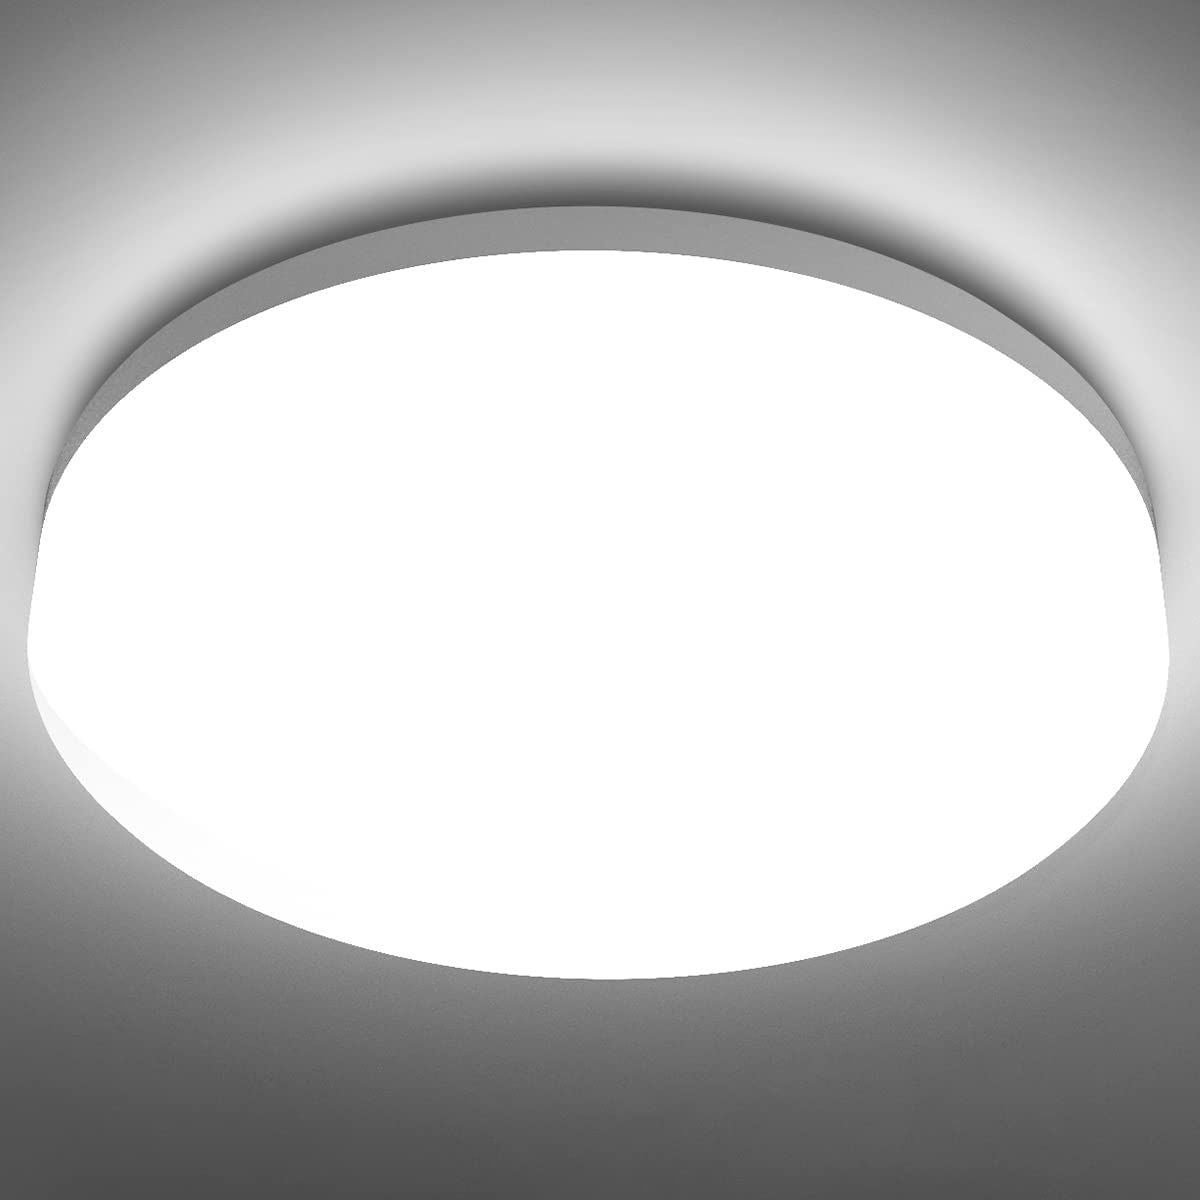 Bathroom Lights Ceiling,Ceiling Lights Round, Indoor Dome Flush Ceiling Light for Bulkhead, Bedroom, Utility Room,Stairs,Hallway